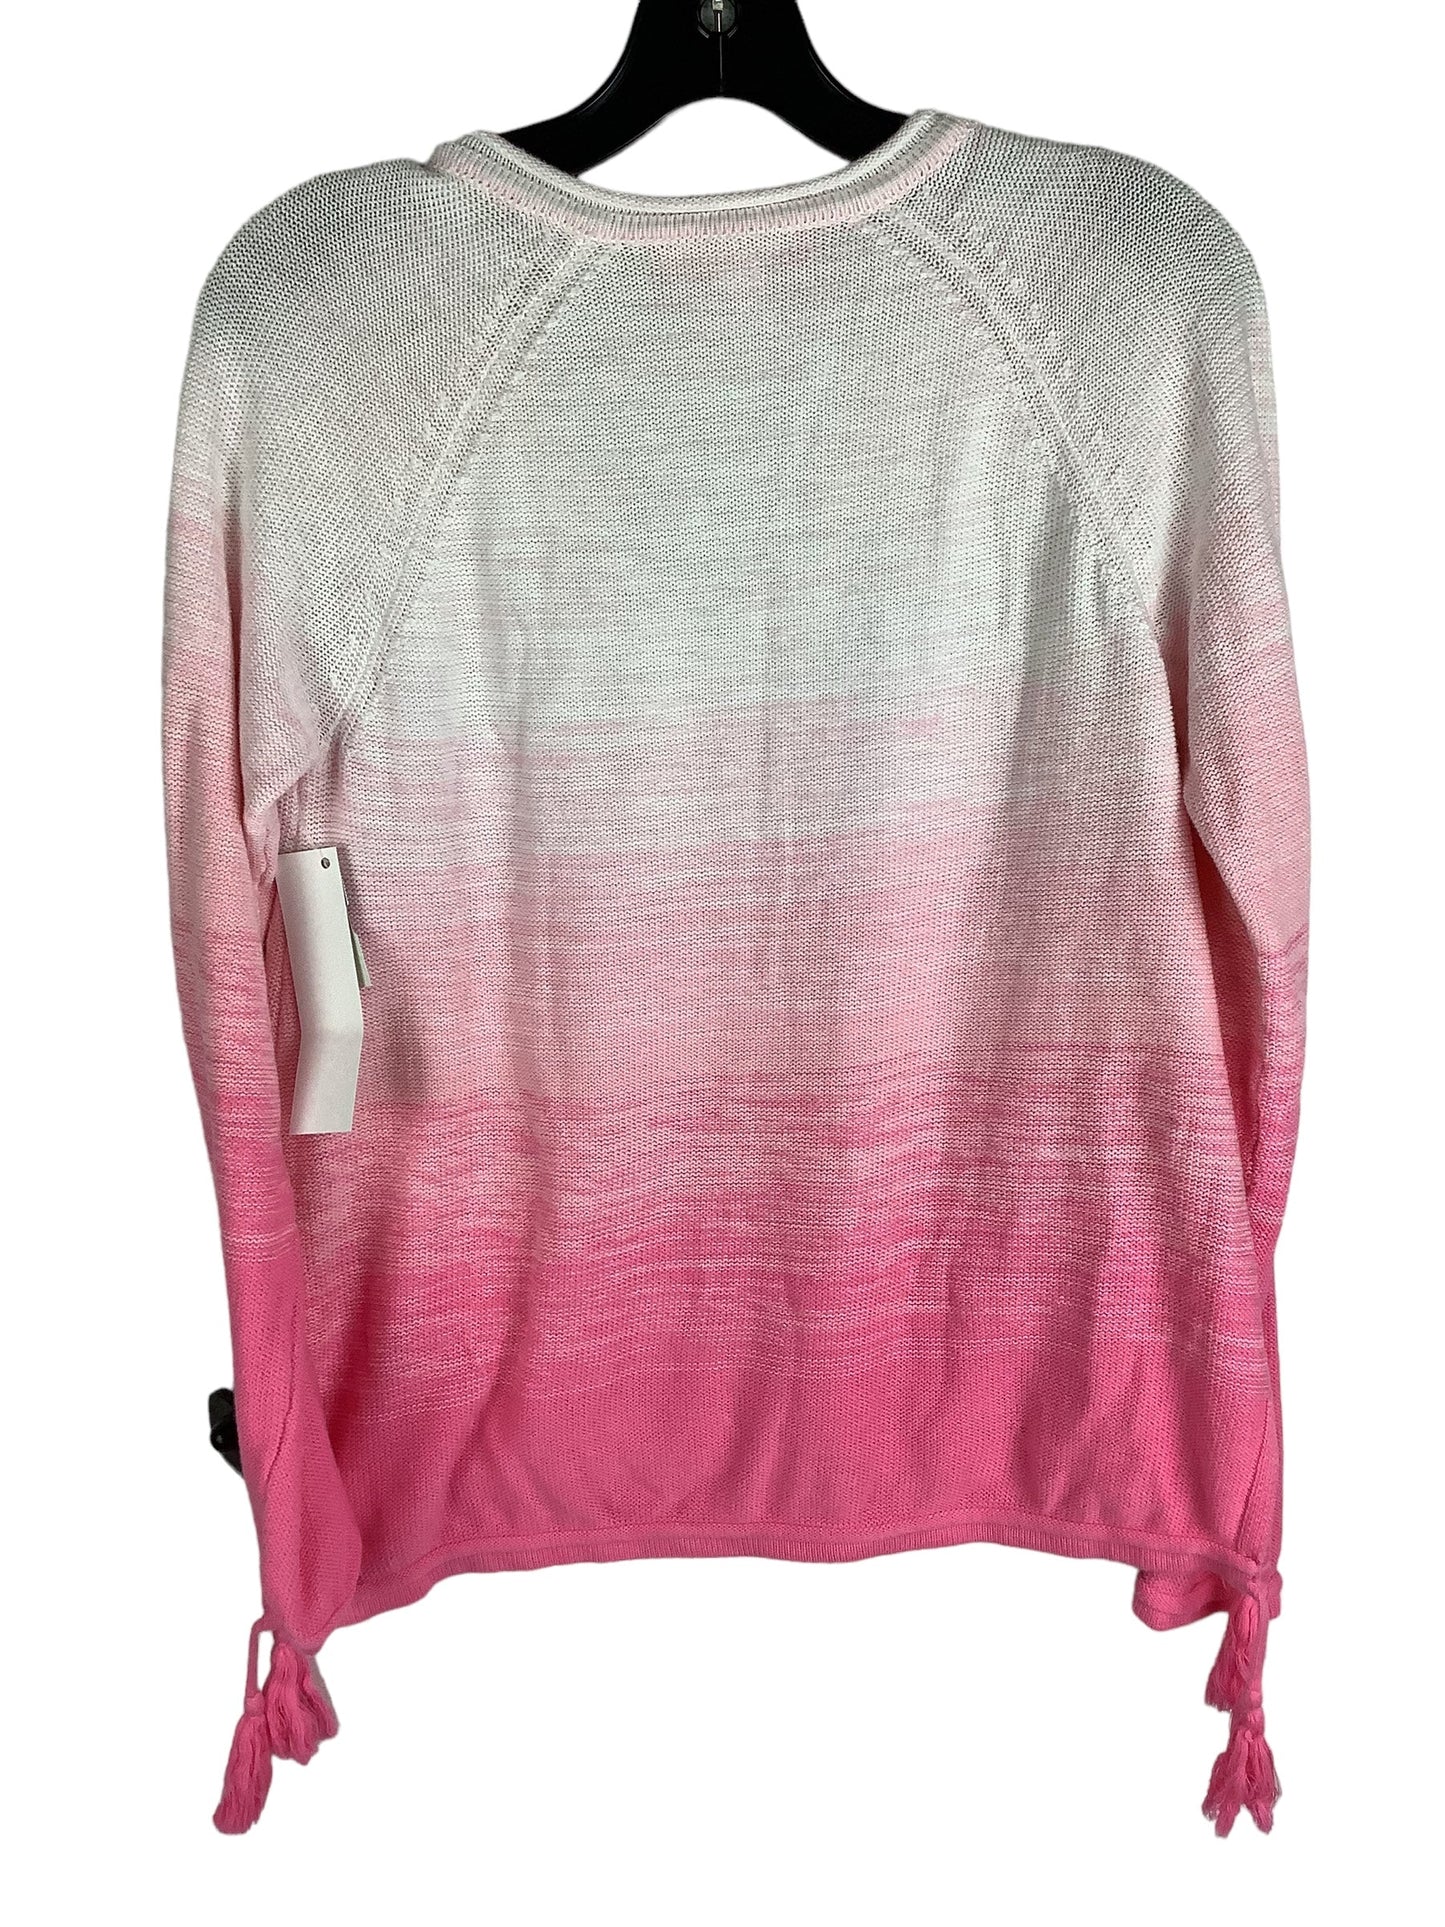 Pink Sweater Designer Lilly Pulitzer, Size M